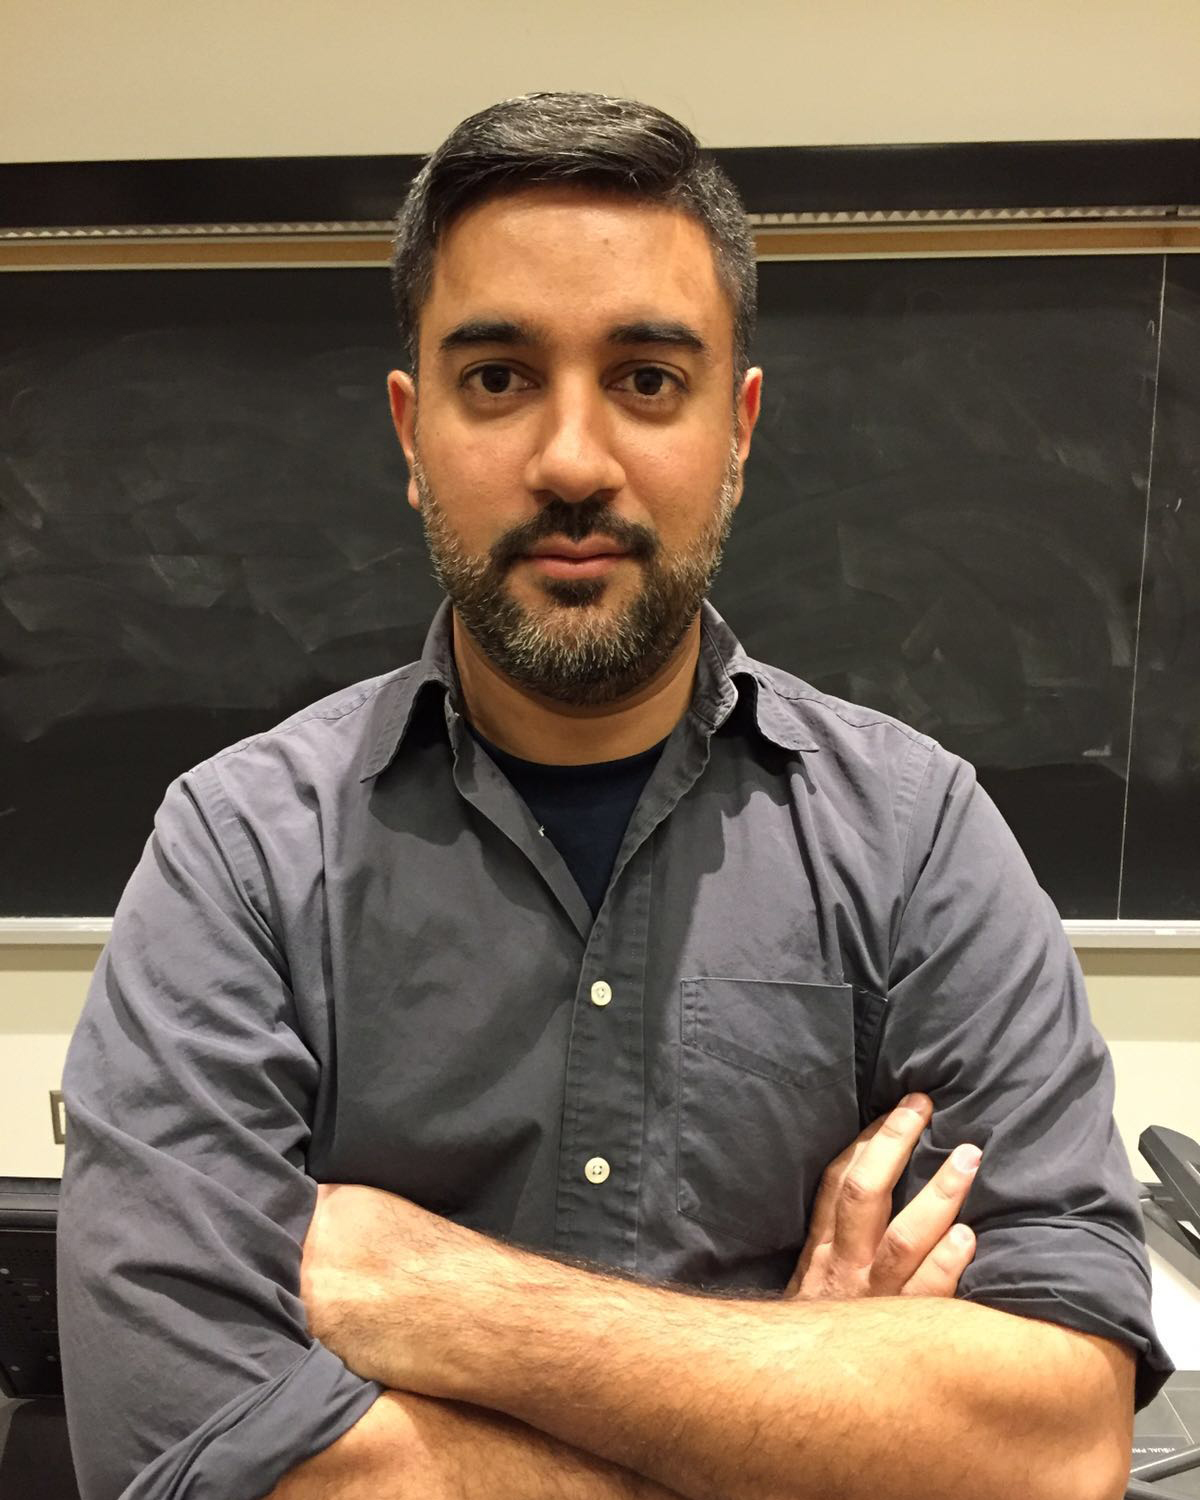 Shiraz wearing a blue collared shirt, with arms folded in front of him, standing in front of a recently cleaned blackboard